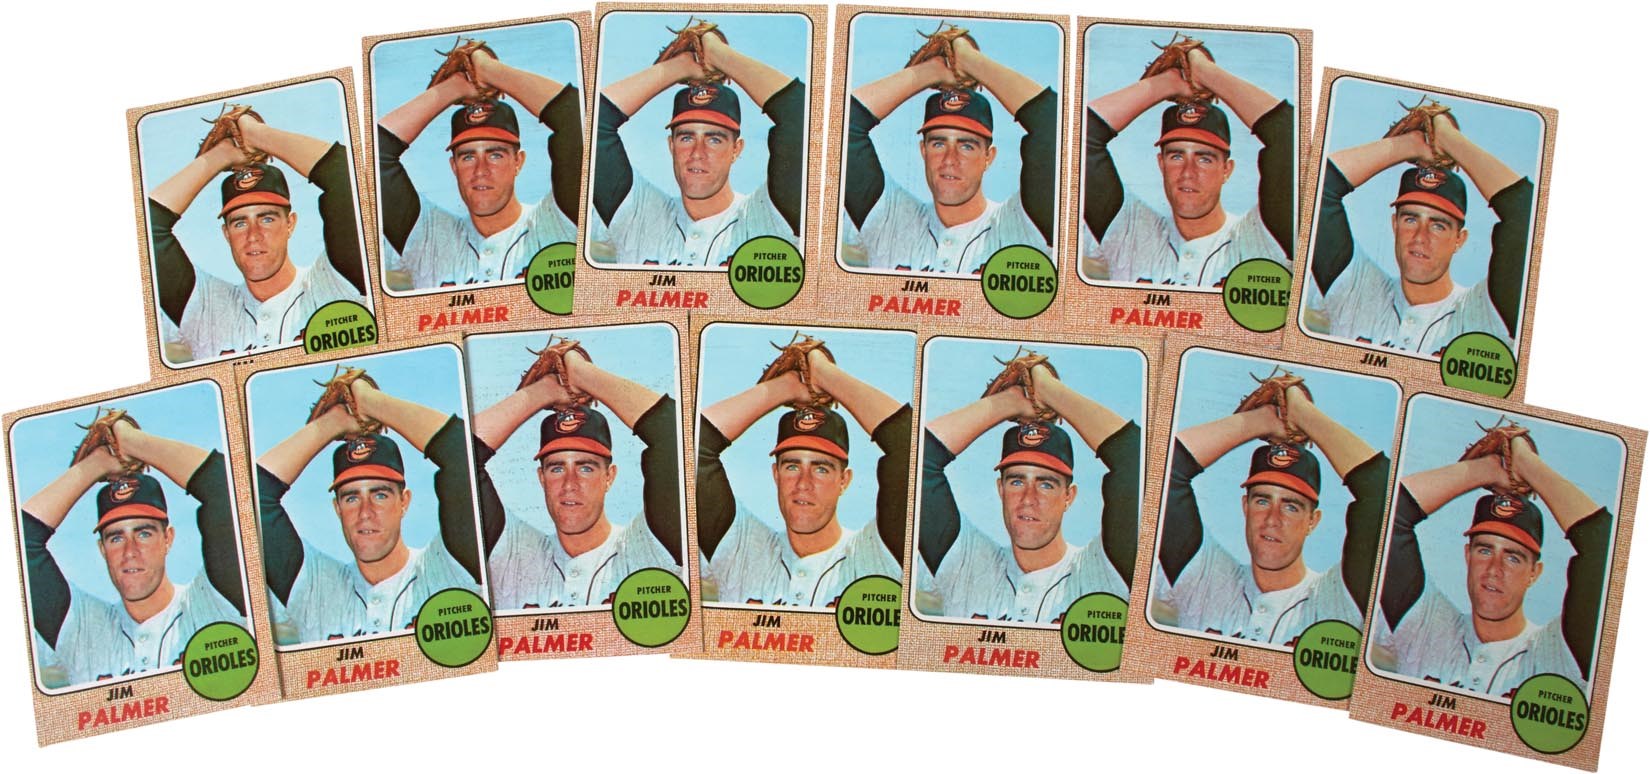 Unopened Wax Packs Boxes and Cases - 1968 Topps Baseball Pair of Vending Boxes